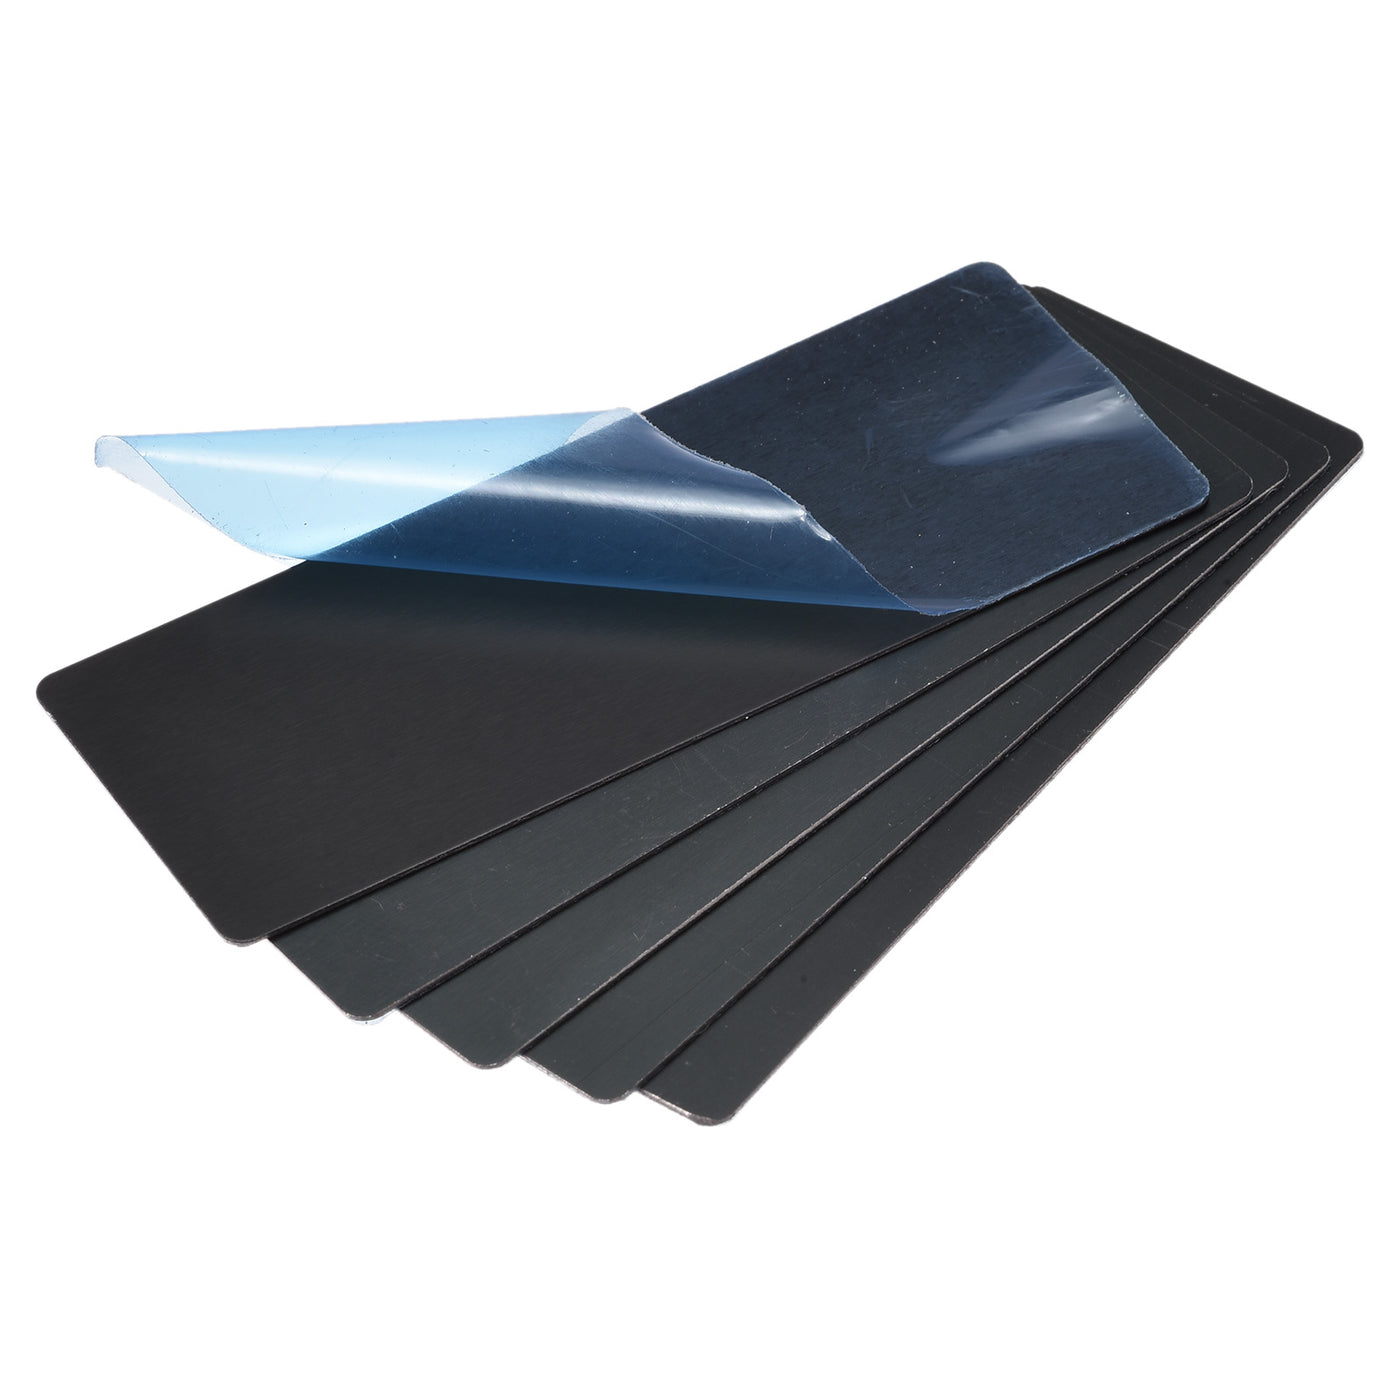 Uxcell Uxcell Blank Metal Card 80mm x 30mm x 1mm Anodized Aluminum Plate Black 10 Pcs